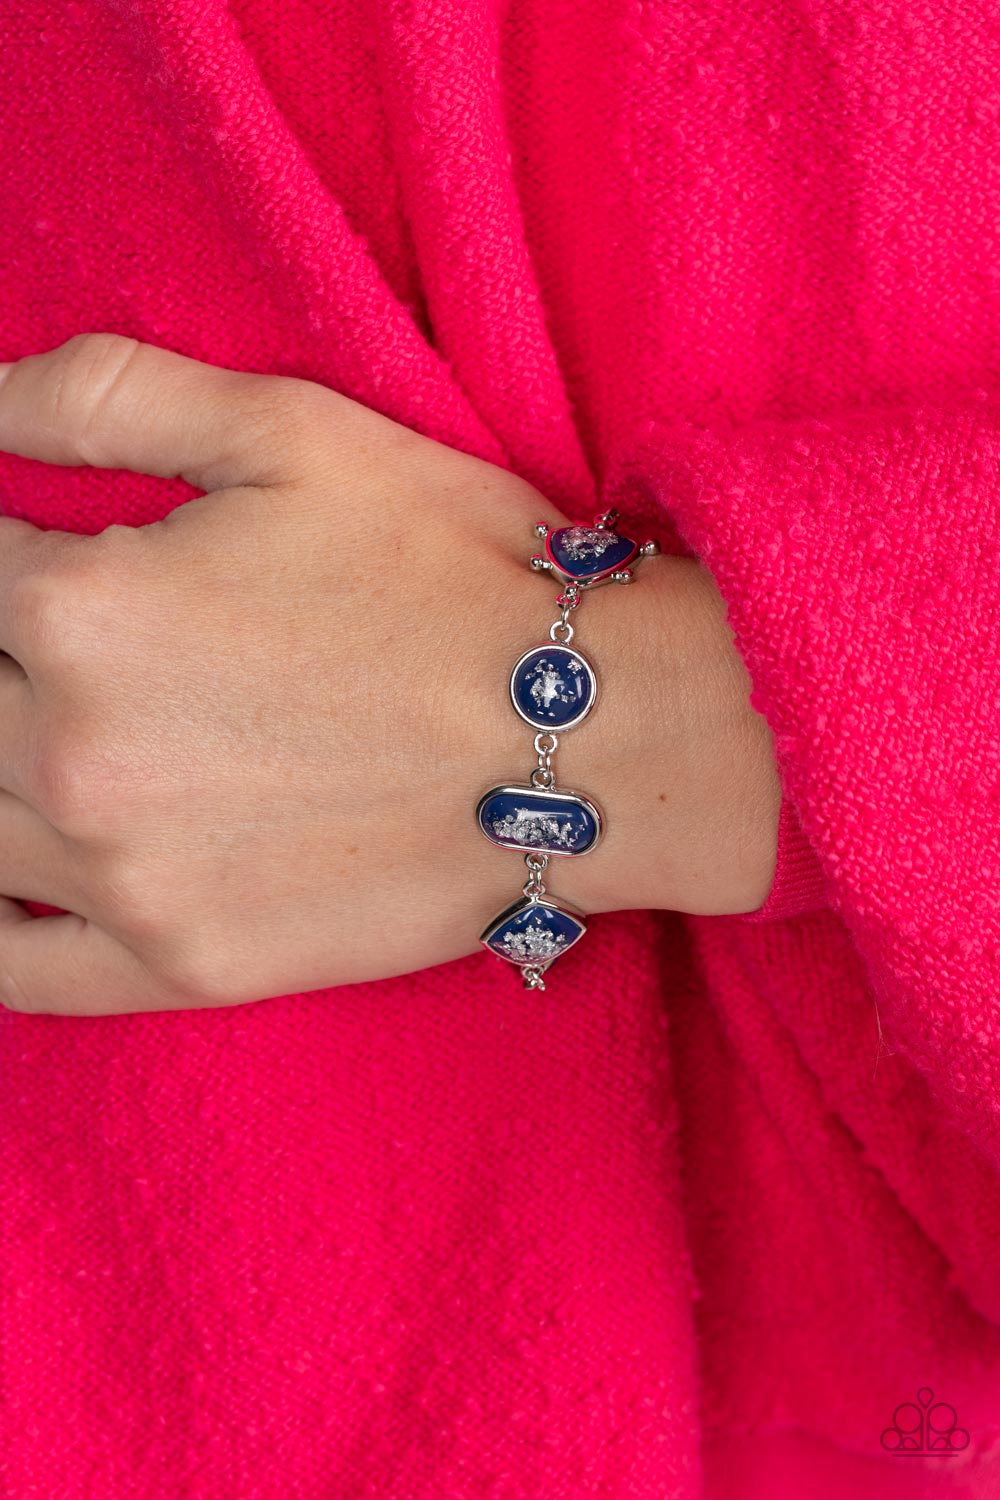 Paparazzi Accessories Speckled Shimmer - Blue Glassy blue beads speckled in flecks of silver shimmer delicately connect around the wrist in a glitzy geometric display. Features an adjustable clasp closure. Sold as one individual bracelet. Get The Complete